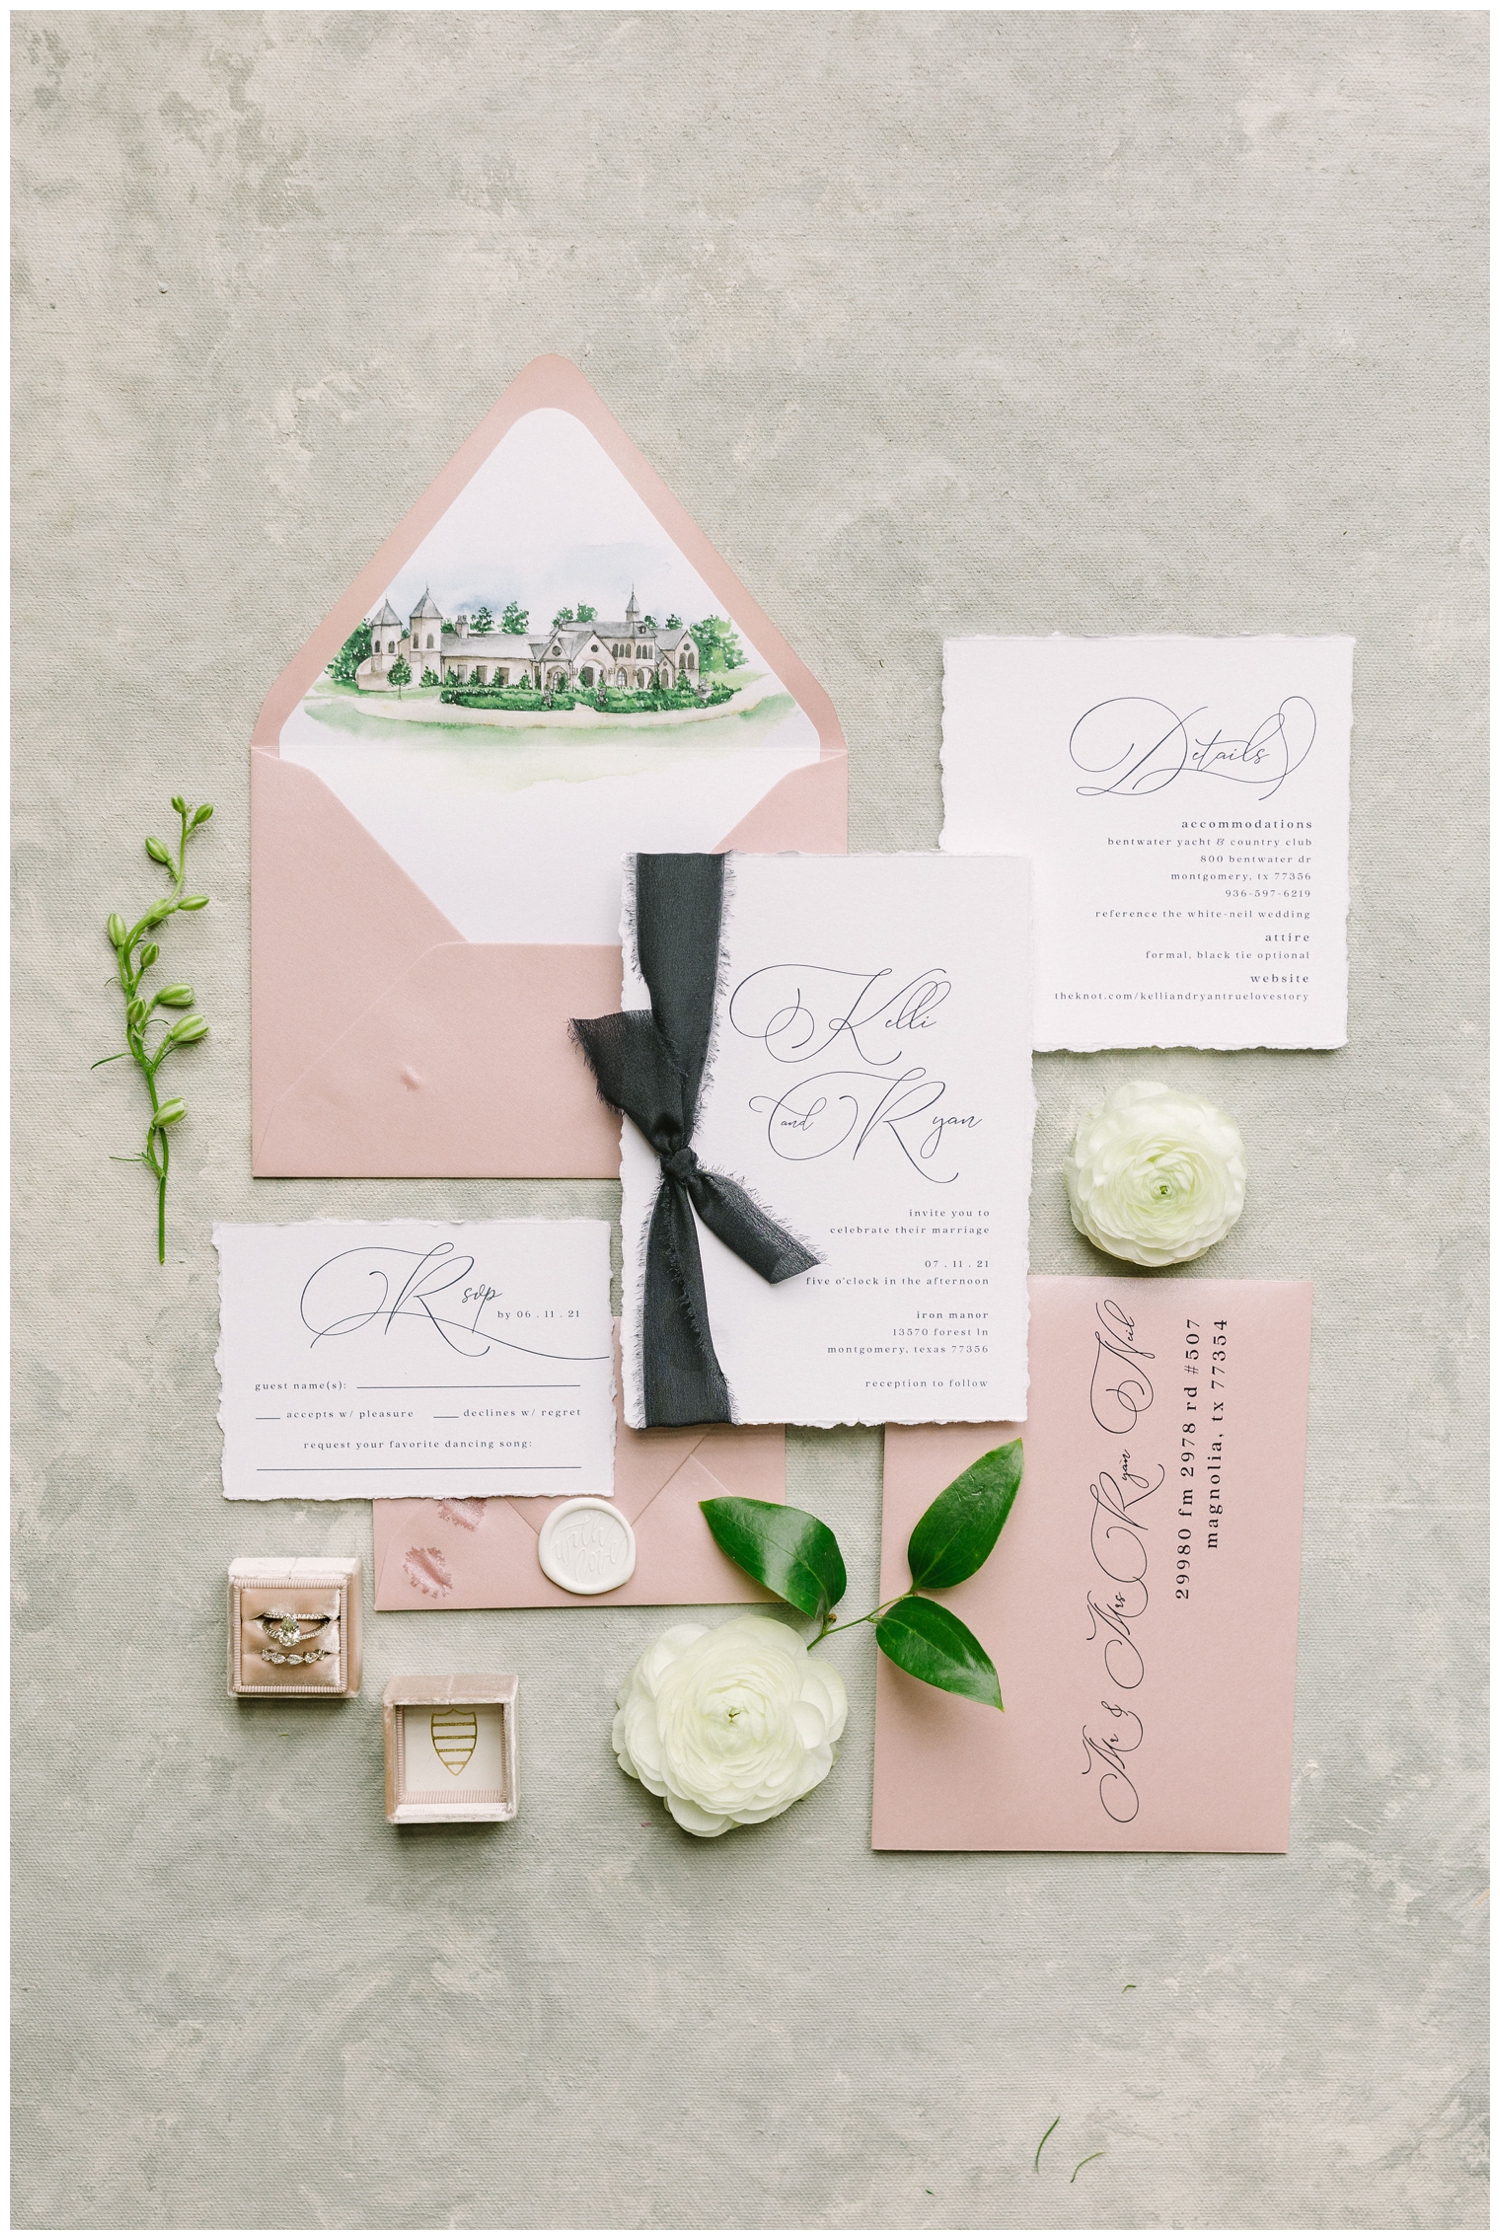 pink, white and black invitation suite with Iron Manor wedding venue on envelope